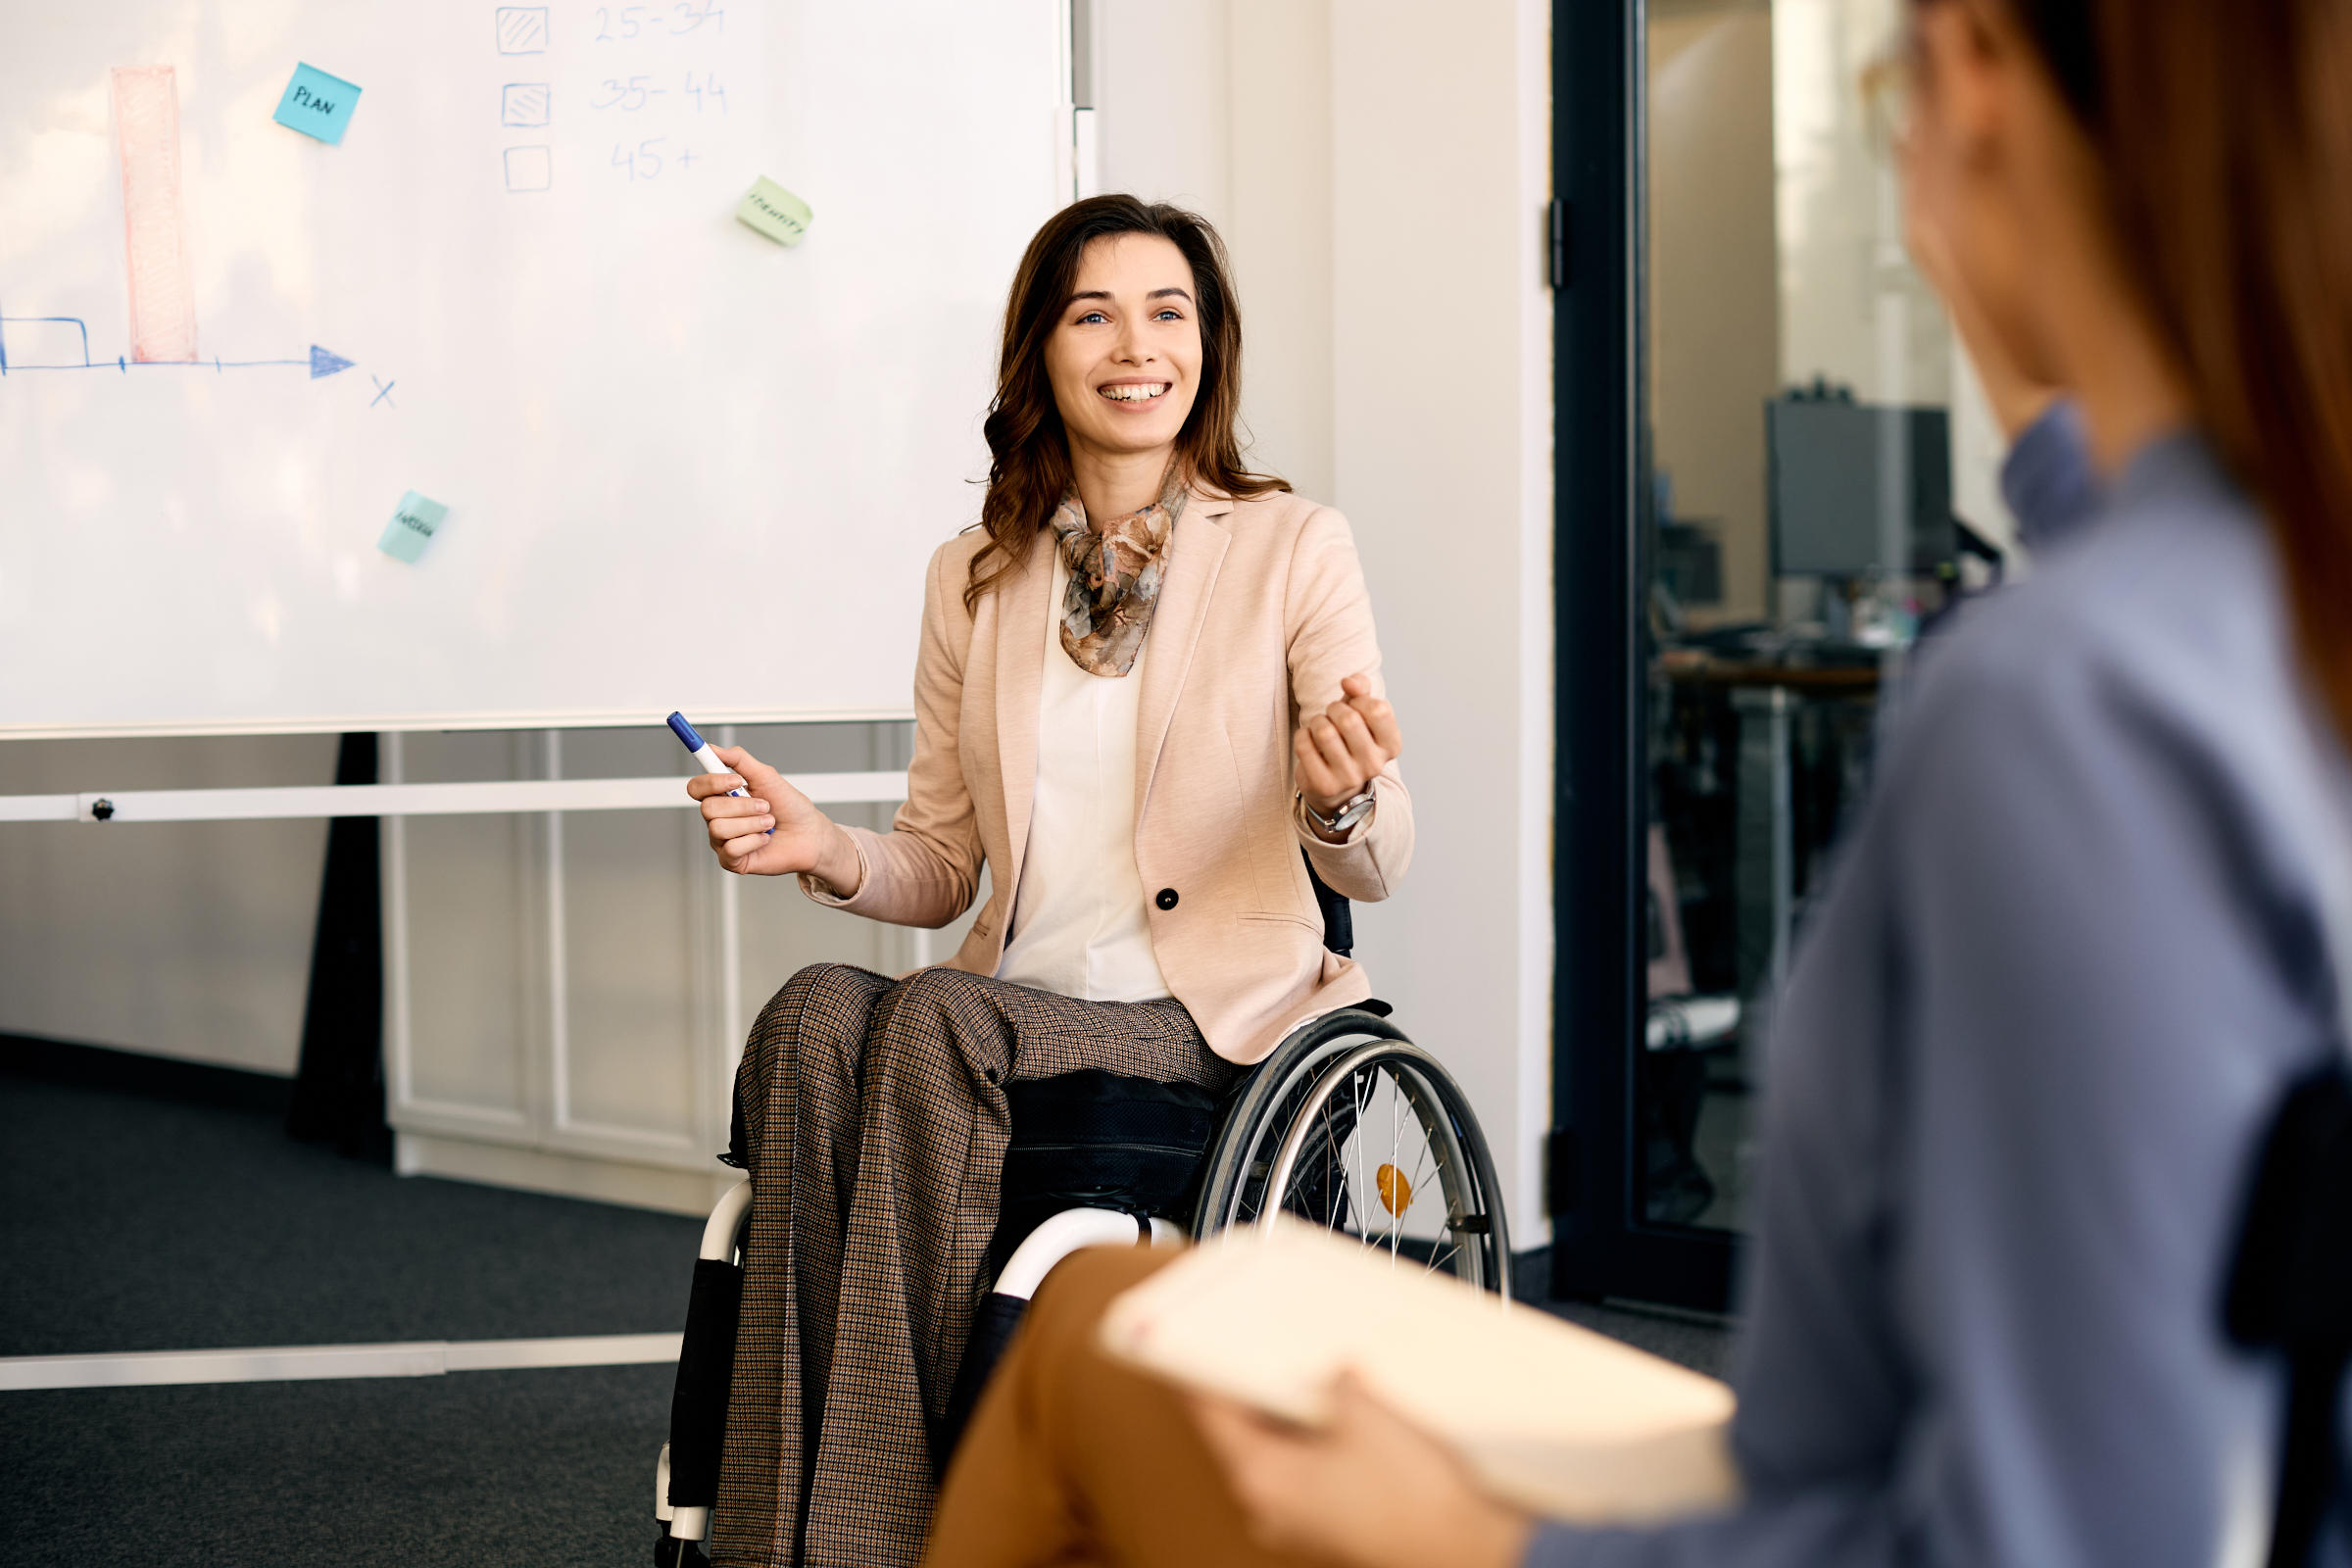 Happy client in wheelchair presenting new ideas on whiteboard to colleagues in the office